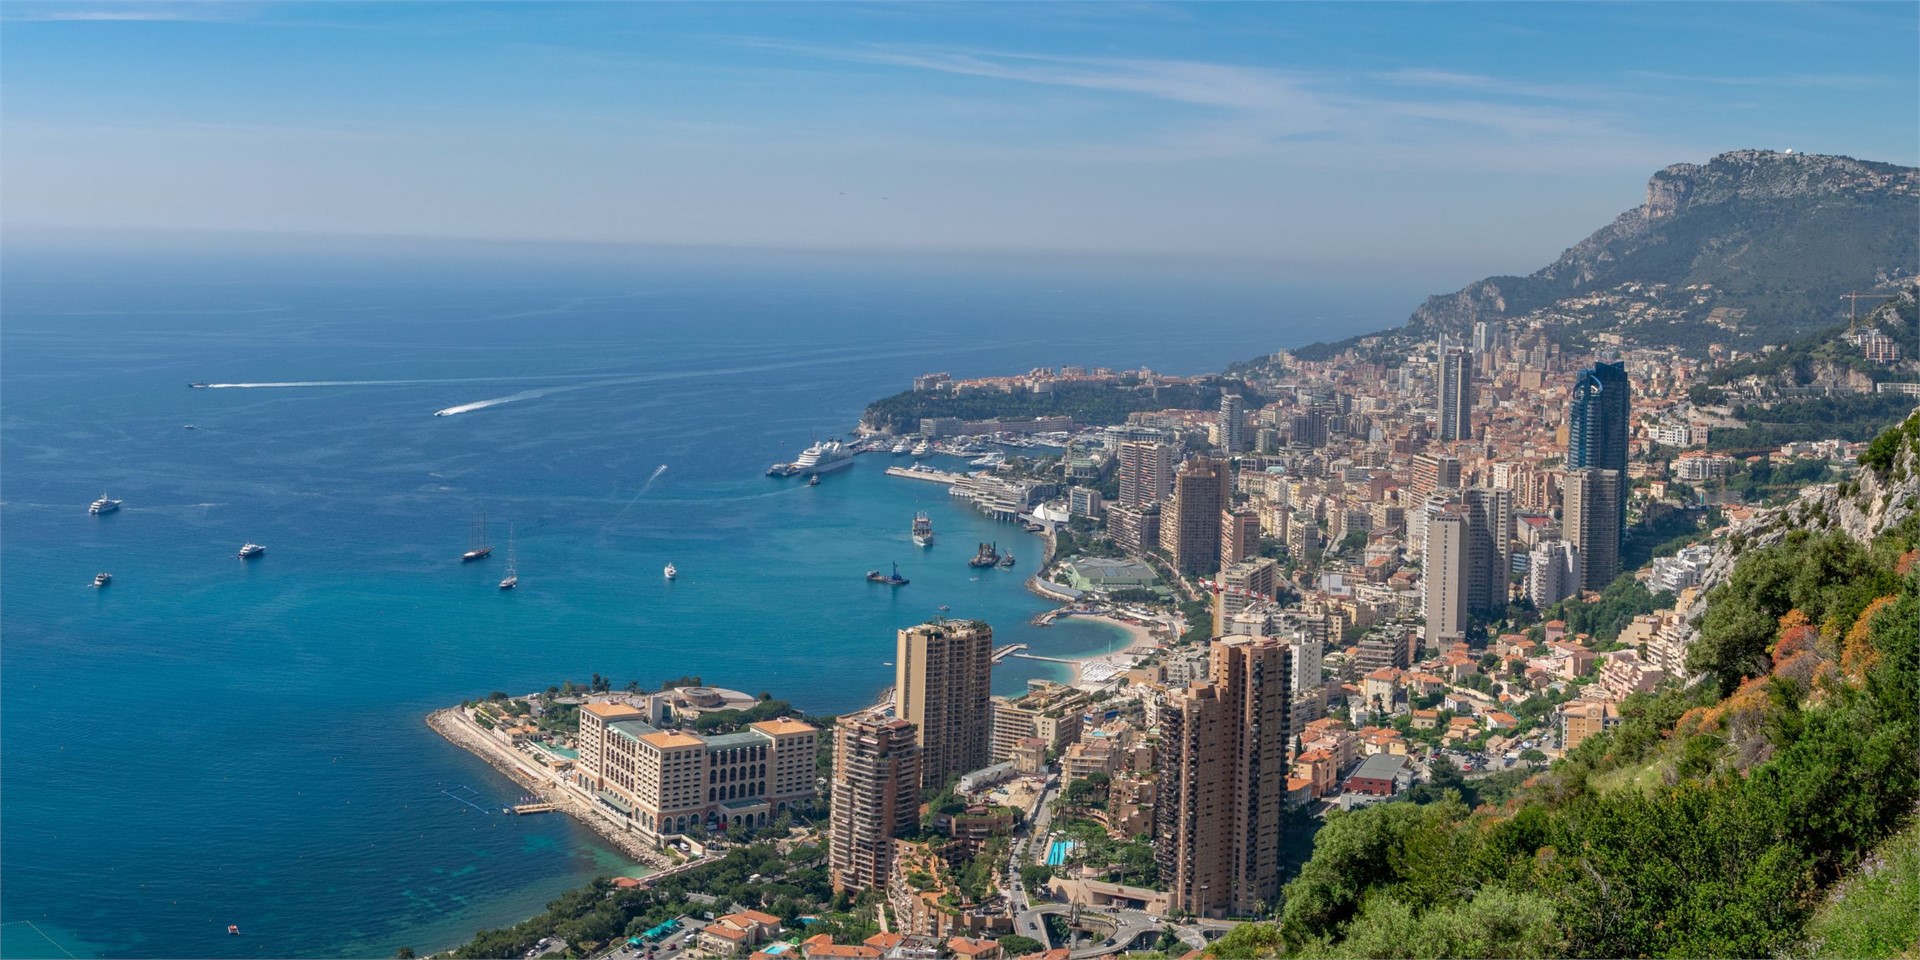 Hotels and accommodation in Monaco
